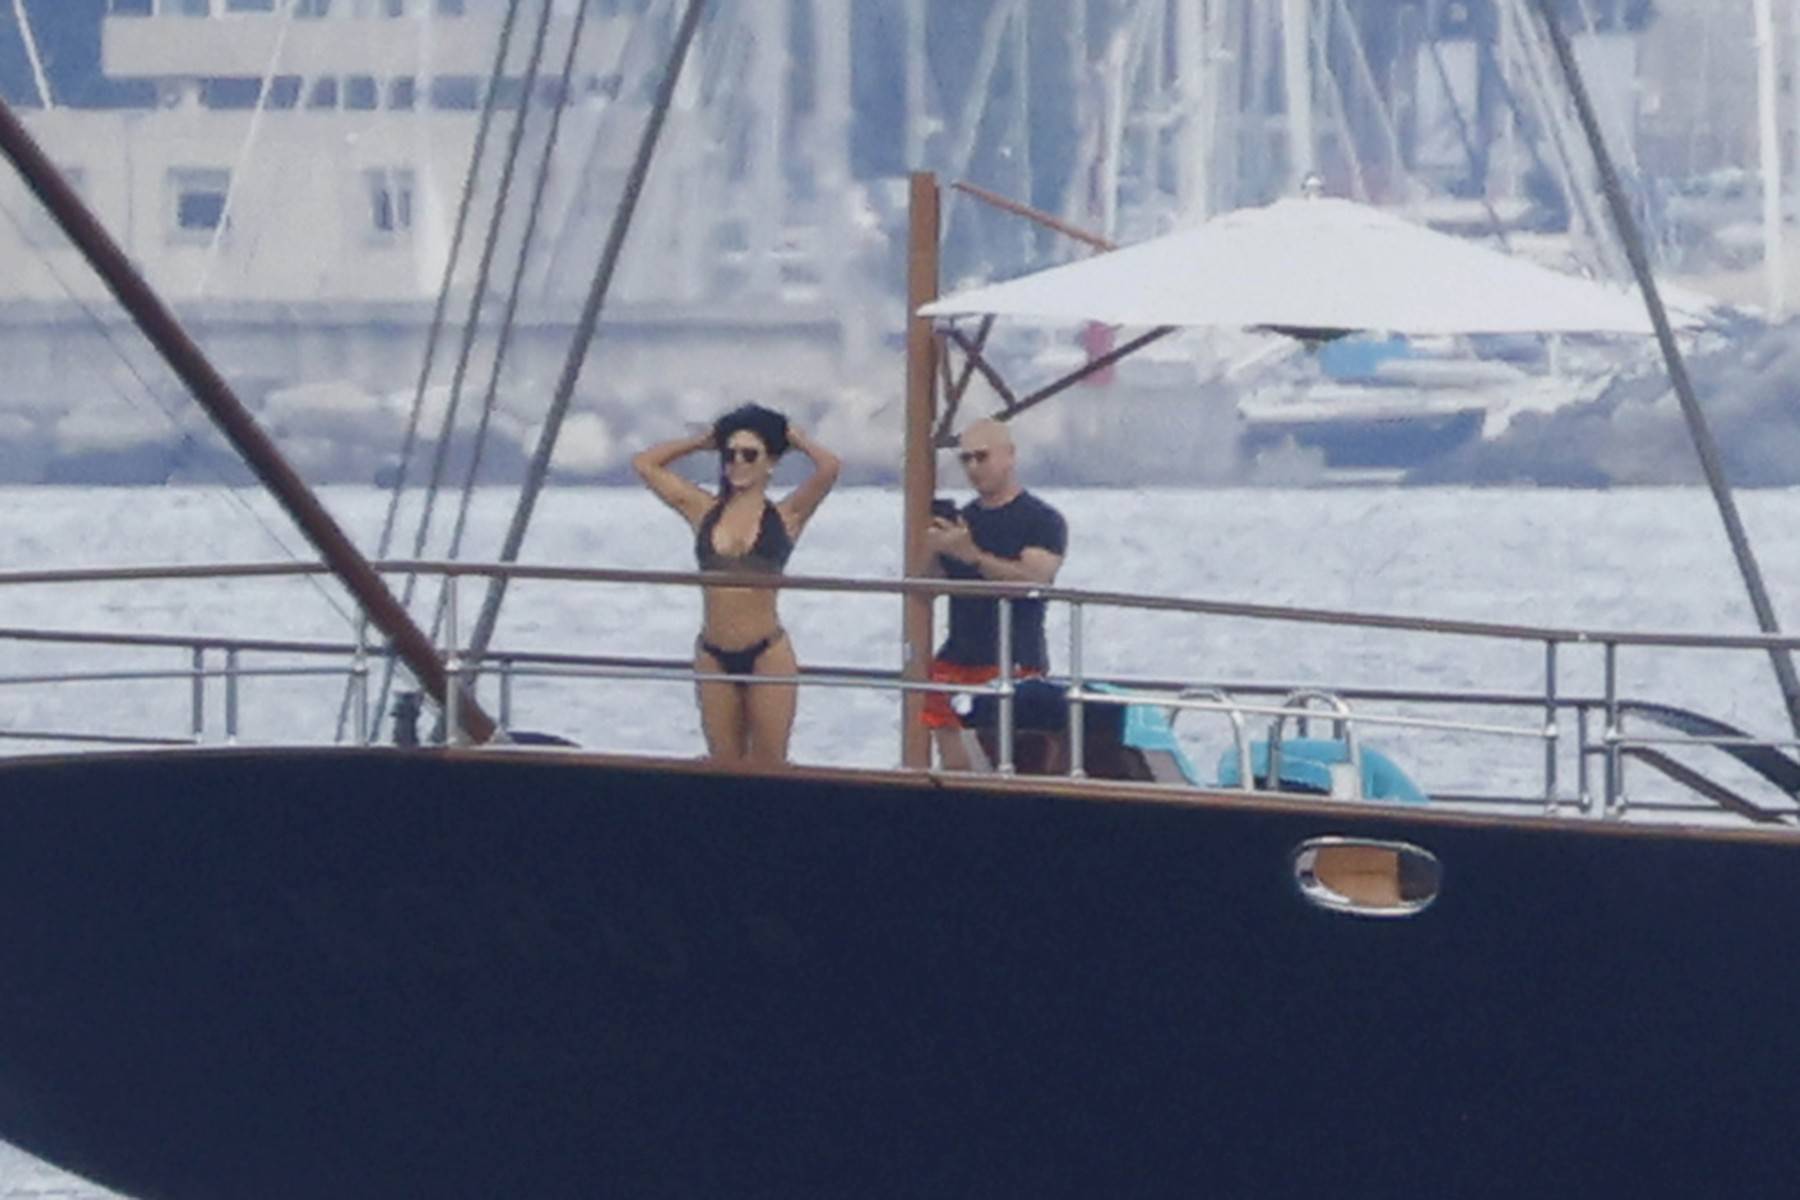 EXCLUSIVE: Jeff Bezos And Lauren Sanchez Arrive By Helicopter On His Superyacht In Portofino